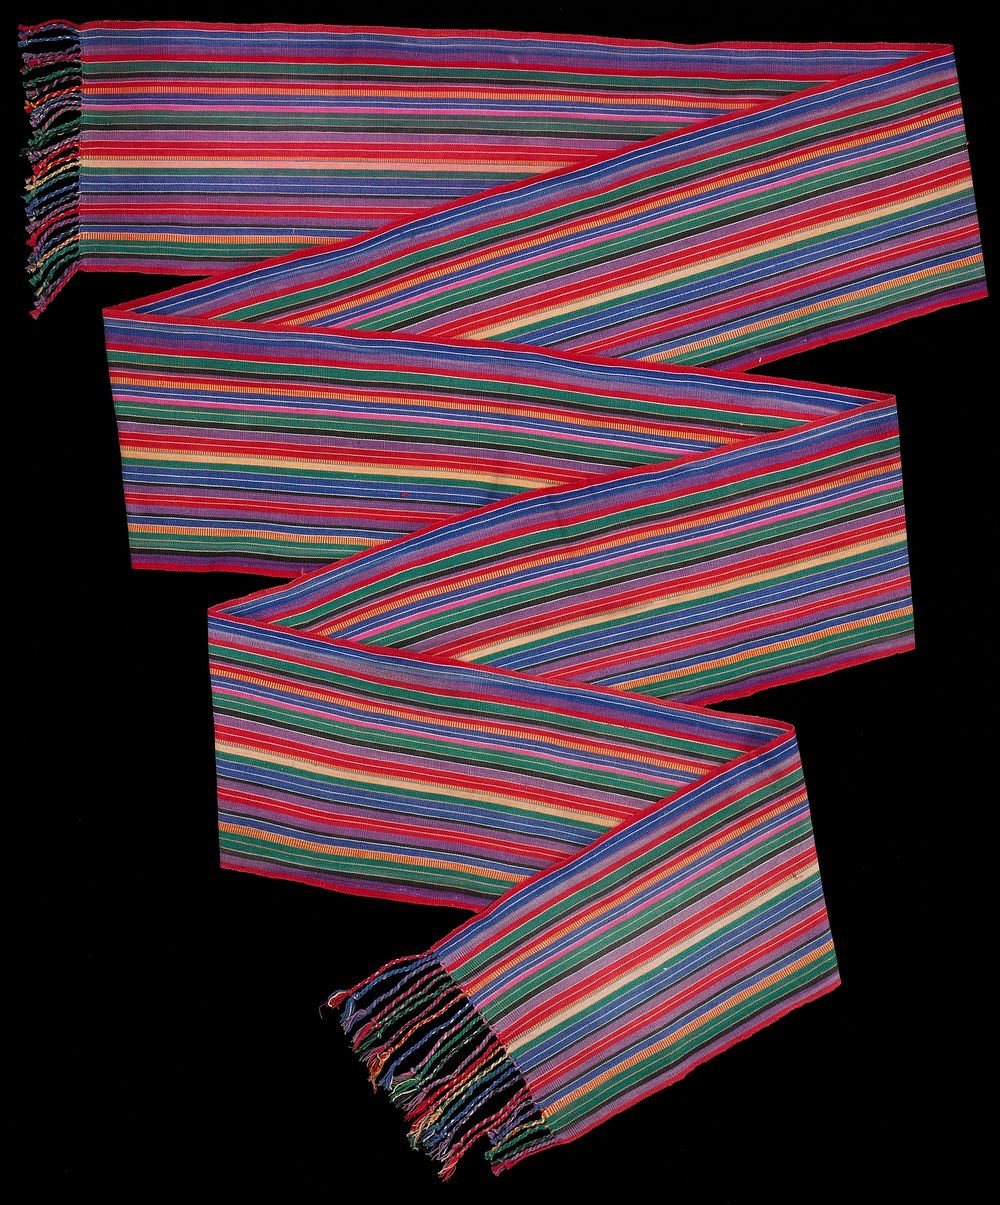 red, purple, brown, yellow, green, orange, pink and white various stripes; twisted fringe at each end. Original from the…